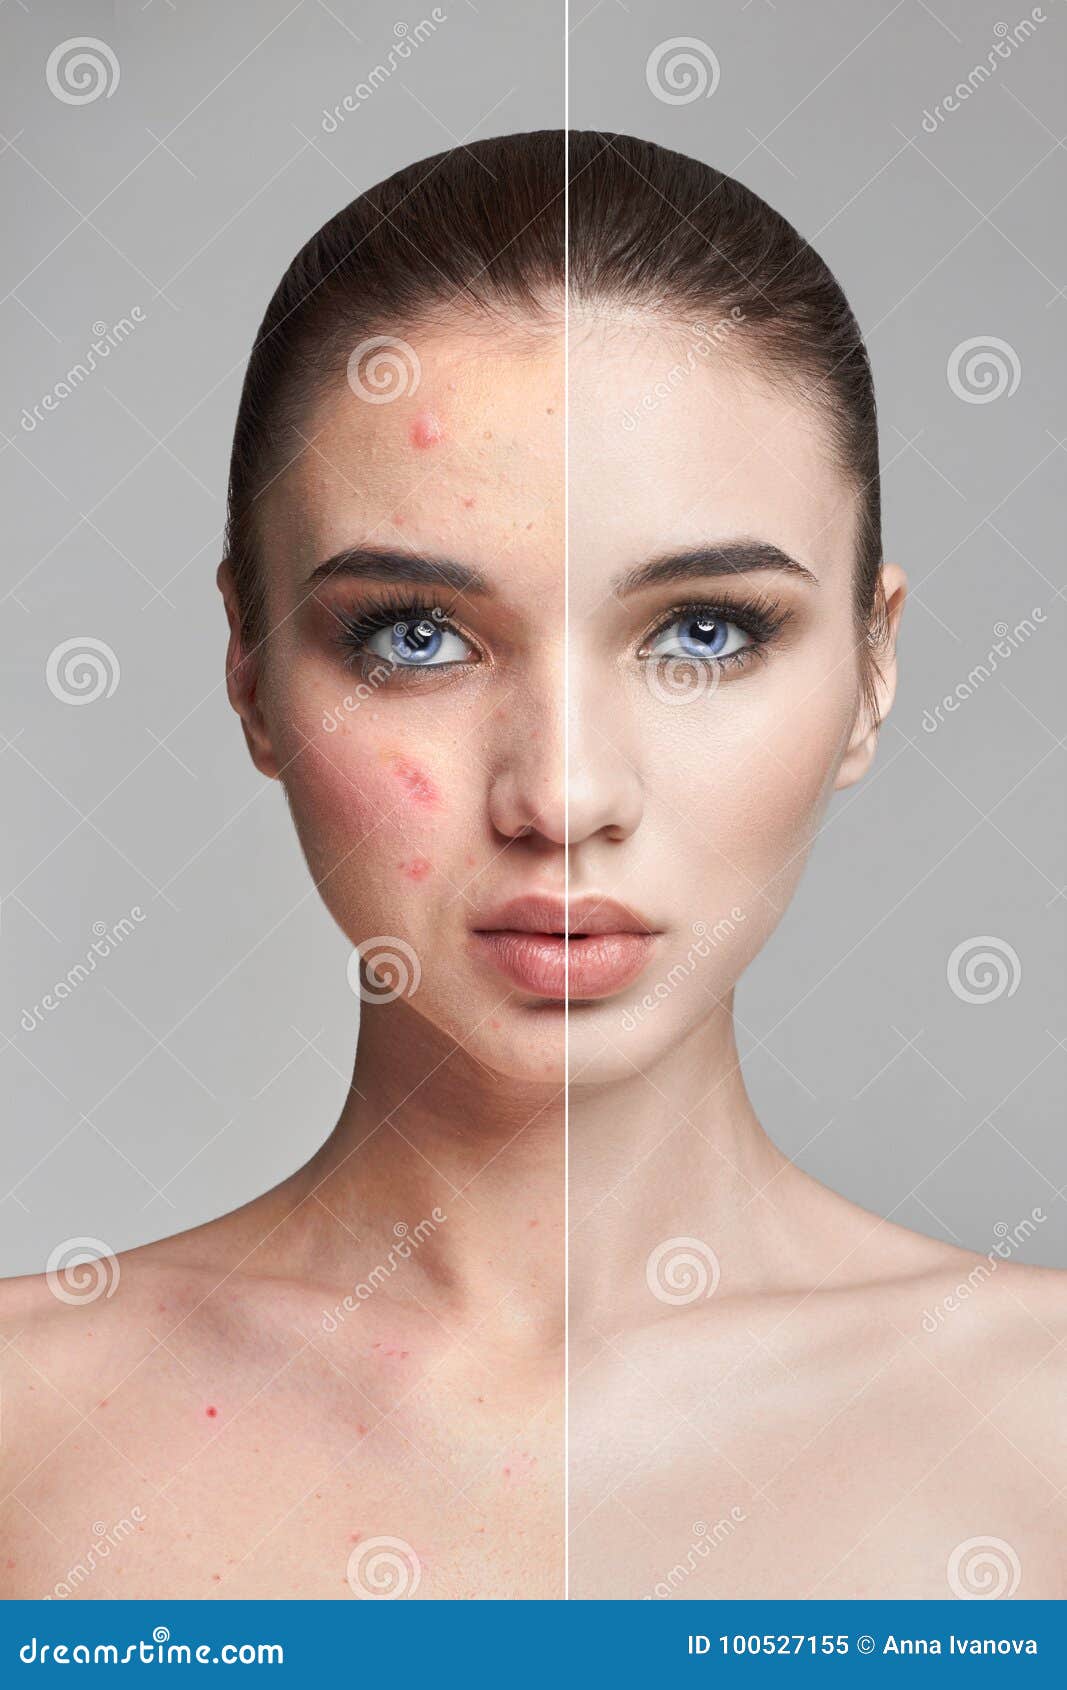 pimples and acne on the woman`s face before and after. cosmetics